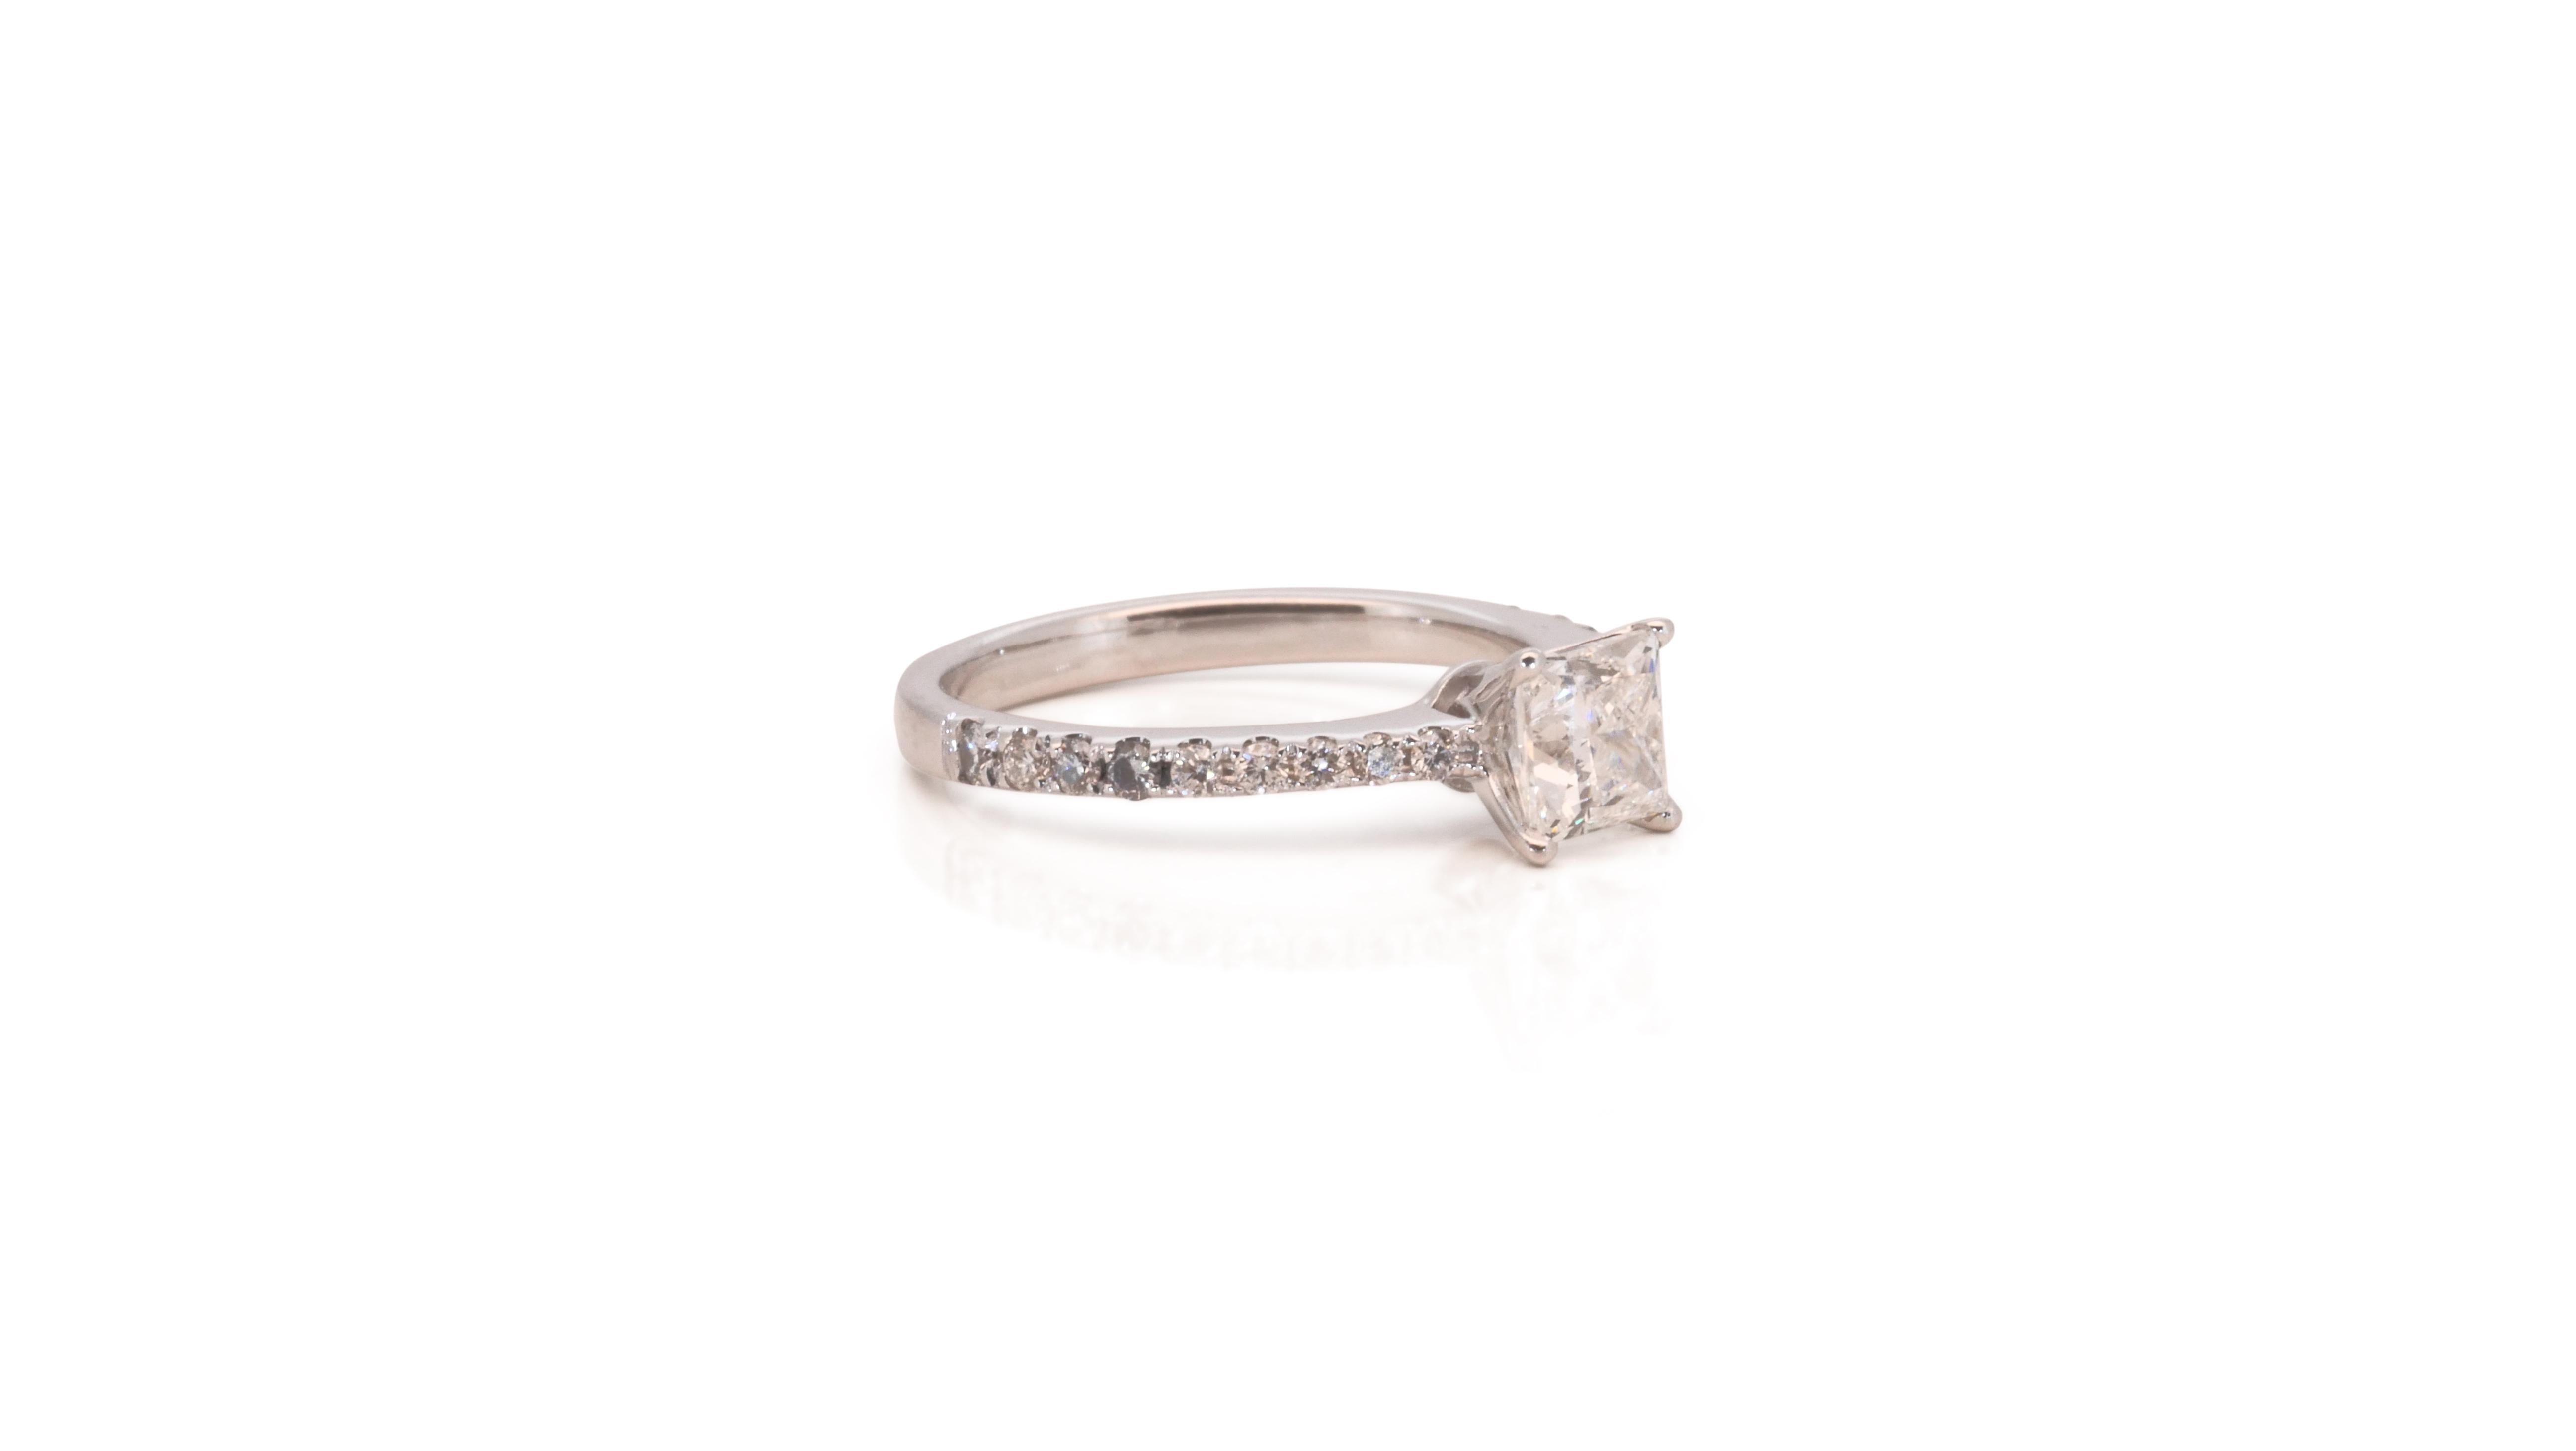 Women's Beautiful 18k White Gold Pave Ring with 0.95ct Natural Diamonds GIA Certificate